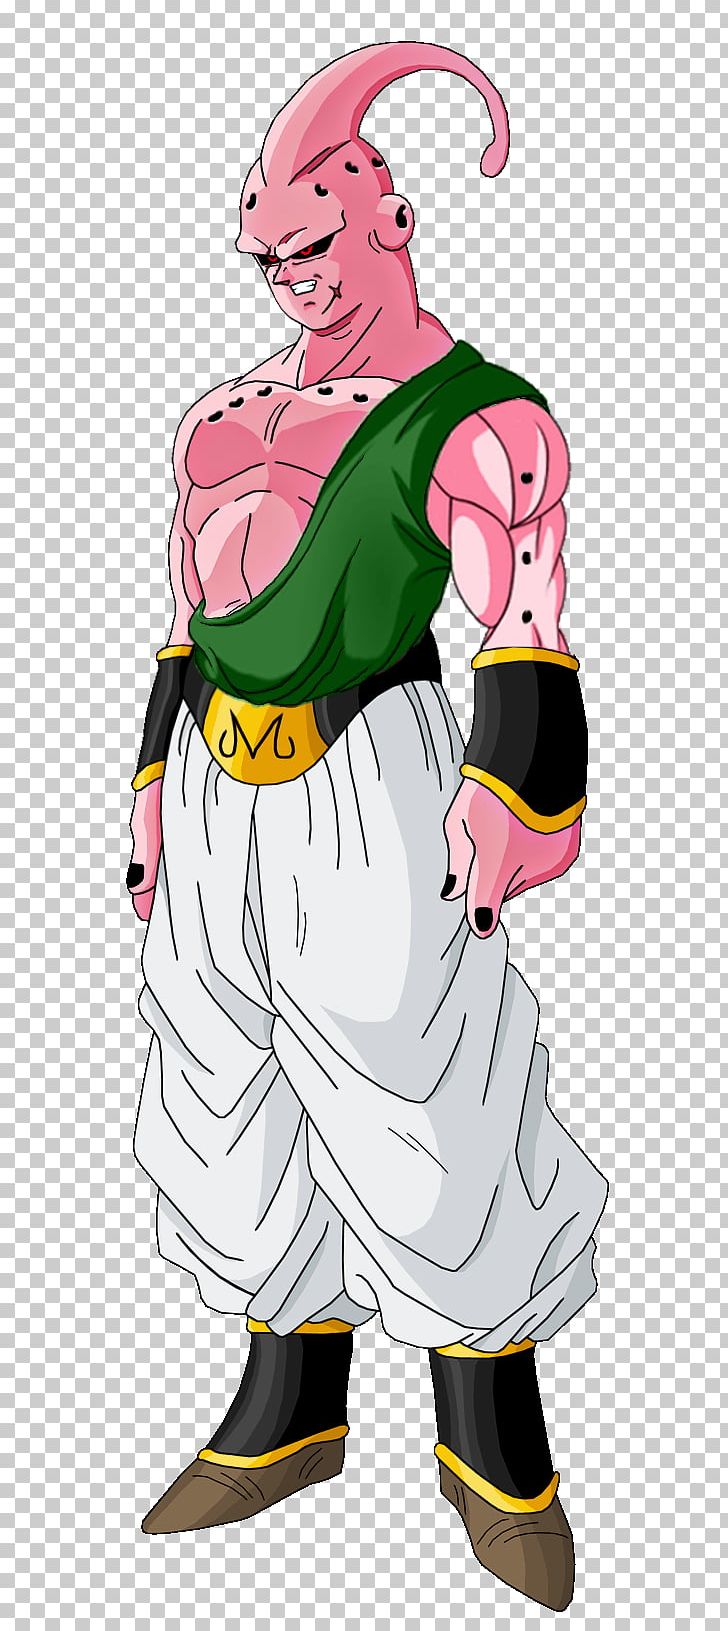 Majin Buu Frieza Goku Cell Gotenks PNG, Clipart, Art, Baby Breath, Cartoon, Cell, Clothing Free PNG Download